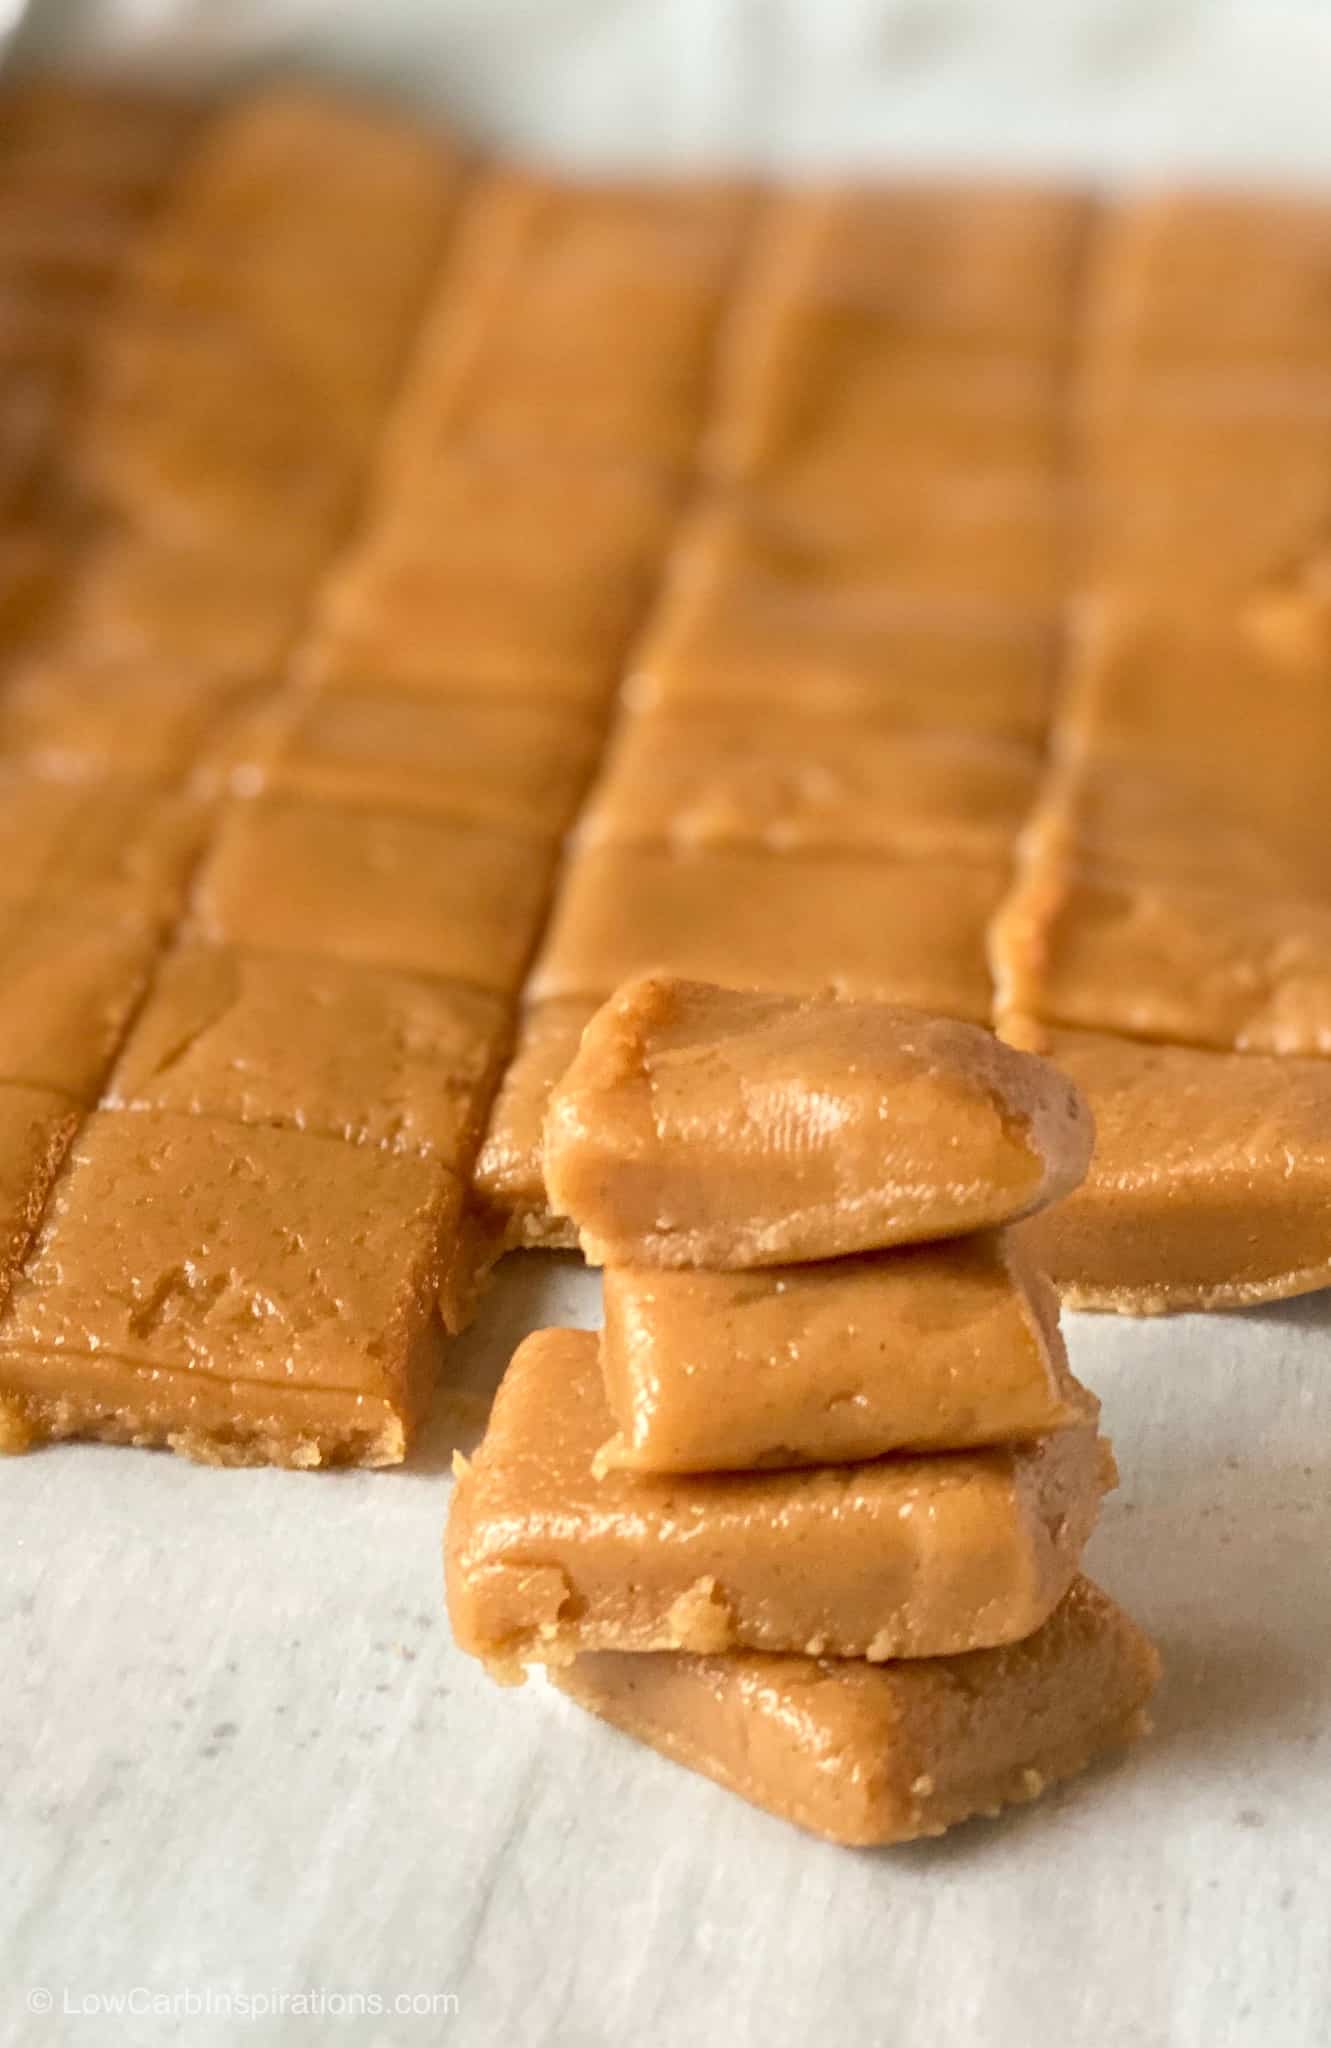 Keto Peanut Butter Fudge Recipe (only 2 ingredients needed!)